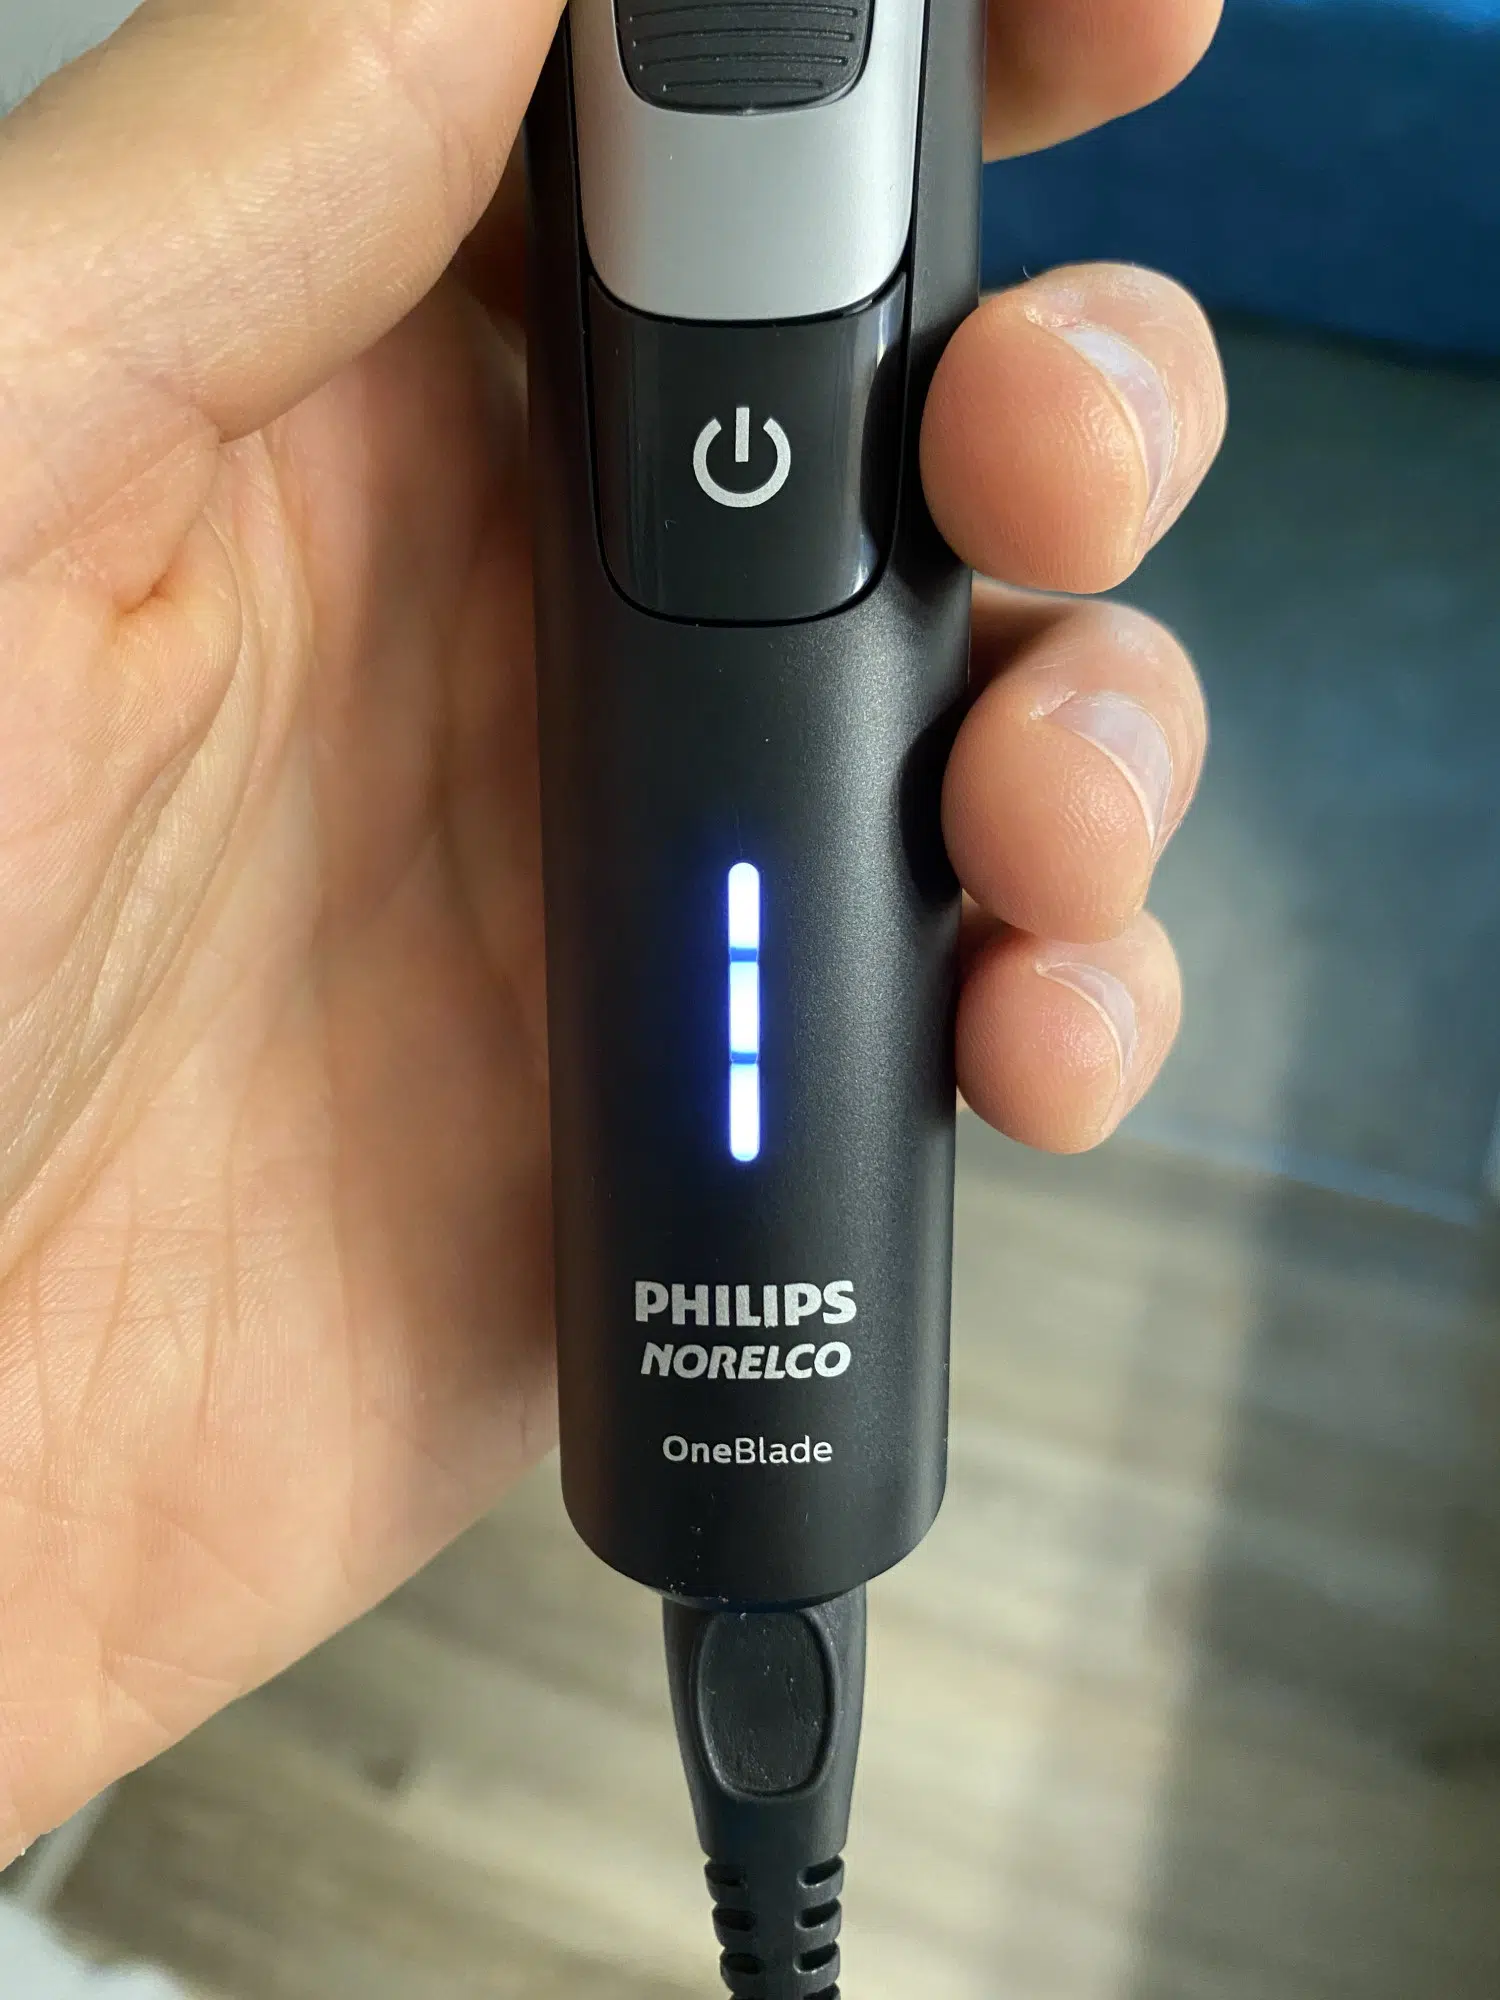 Saturate Palace continue Philips Norelco OneBlade Pro Review: A Close Shave for a Fair Price